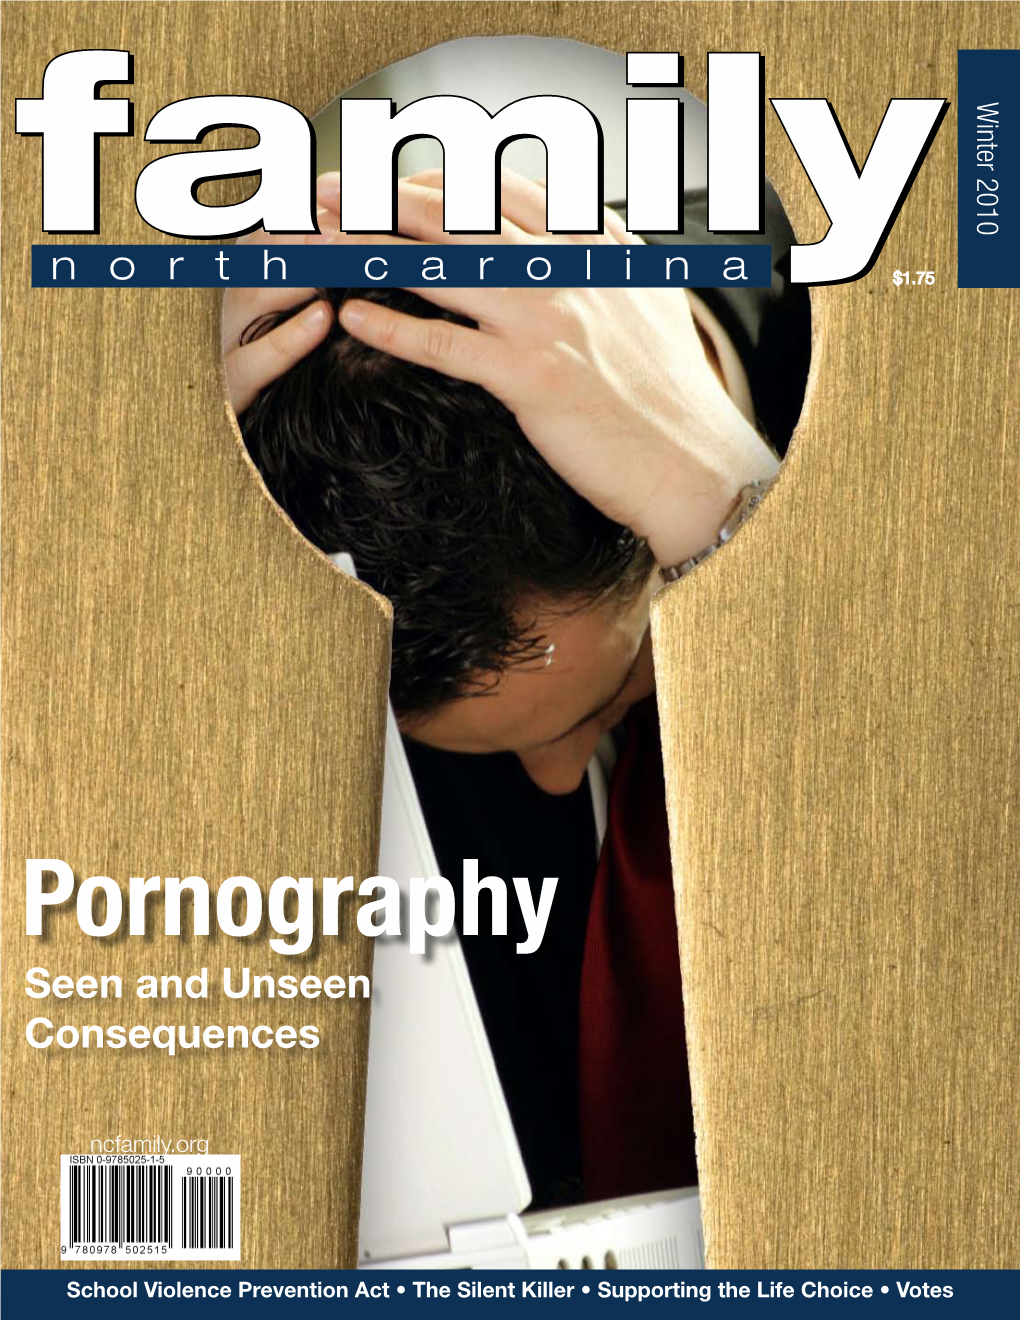 Pornography Seen and Unseen Consequences